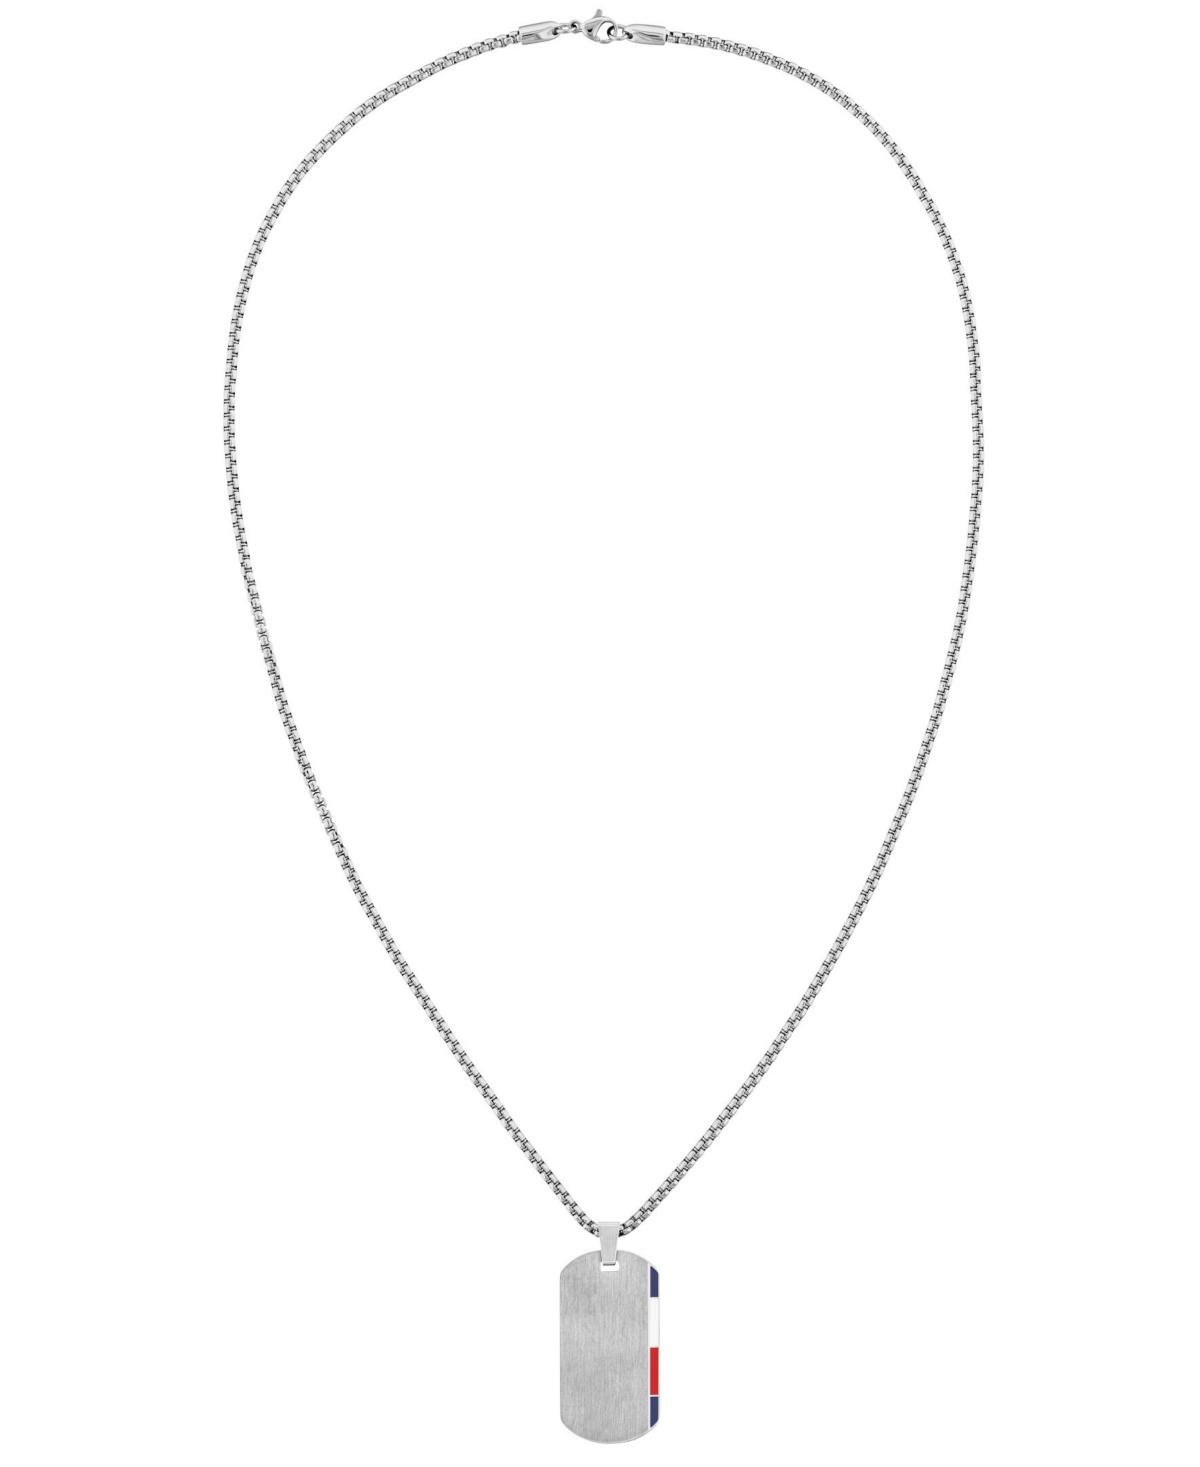 Men's Stainless Steel Necklace - Silver